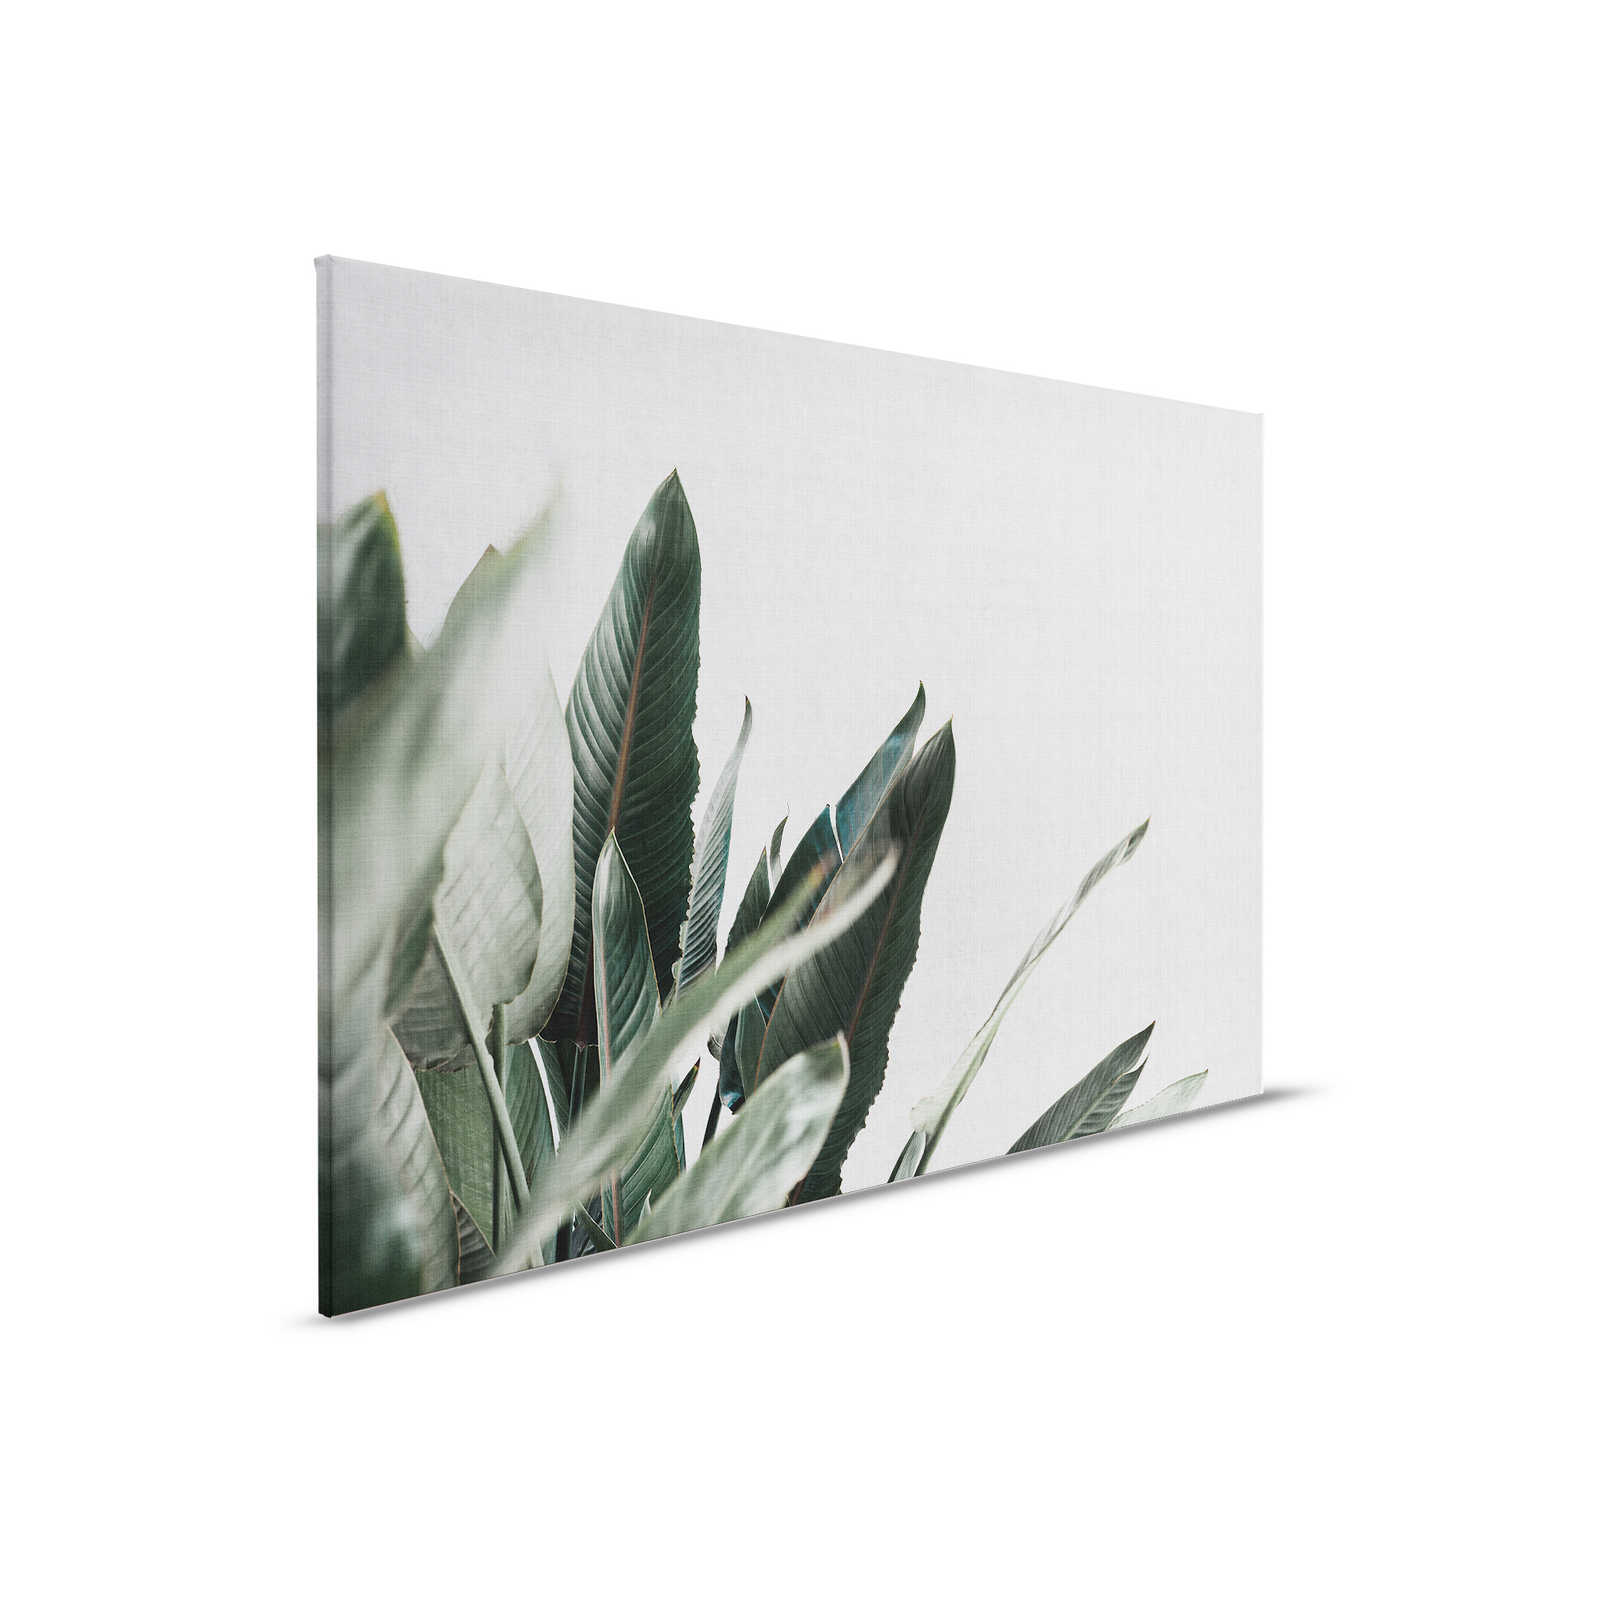 Urban jungle 1 - Canvas painting with palm leaves in natural linen look - 0.90 m x 0.60 m
